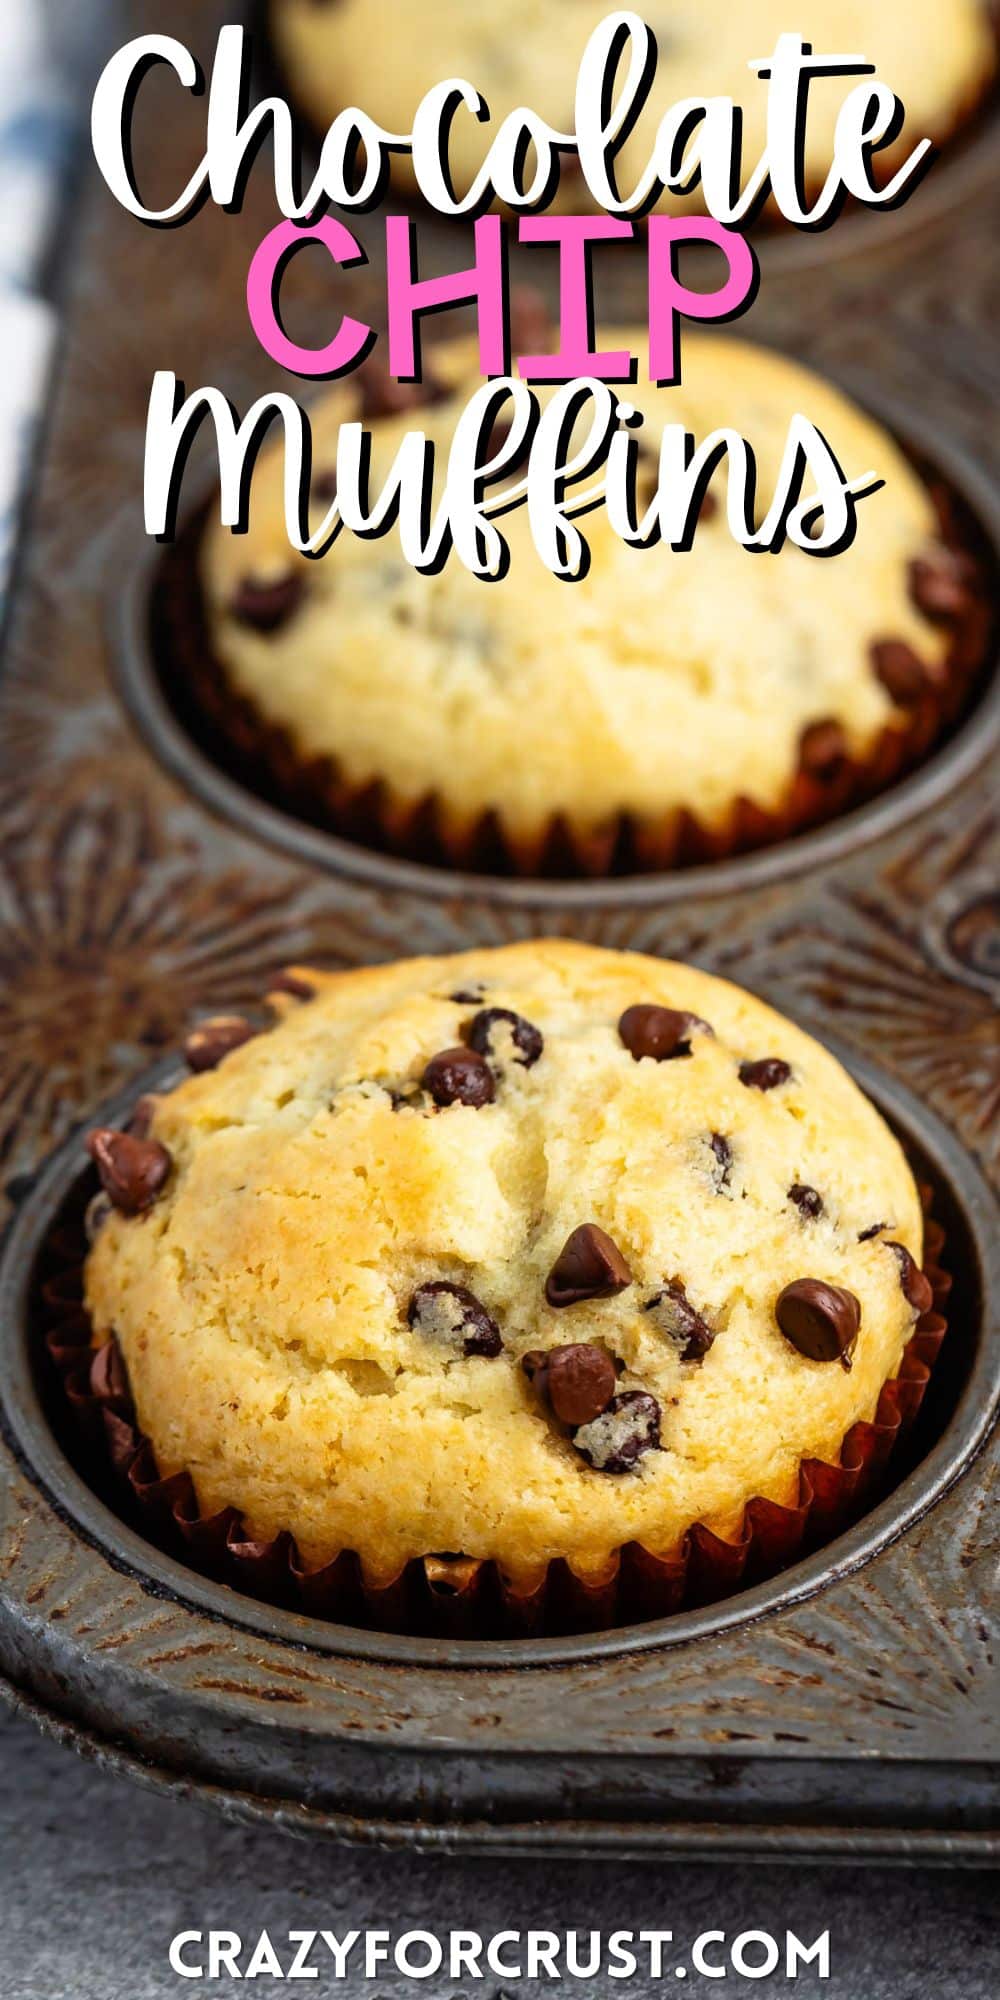 stacked muffins in the baking pan with mini chocolate chips baked in with words on the image.